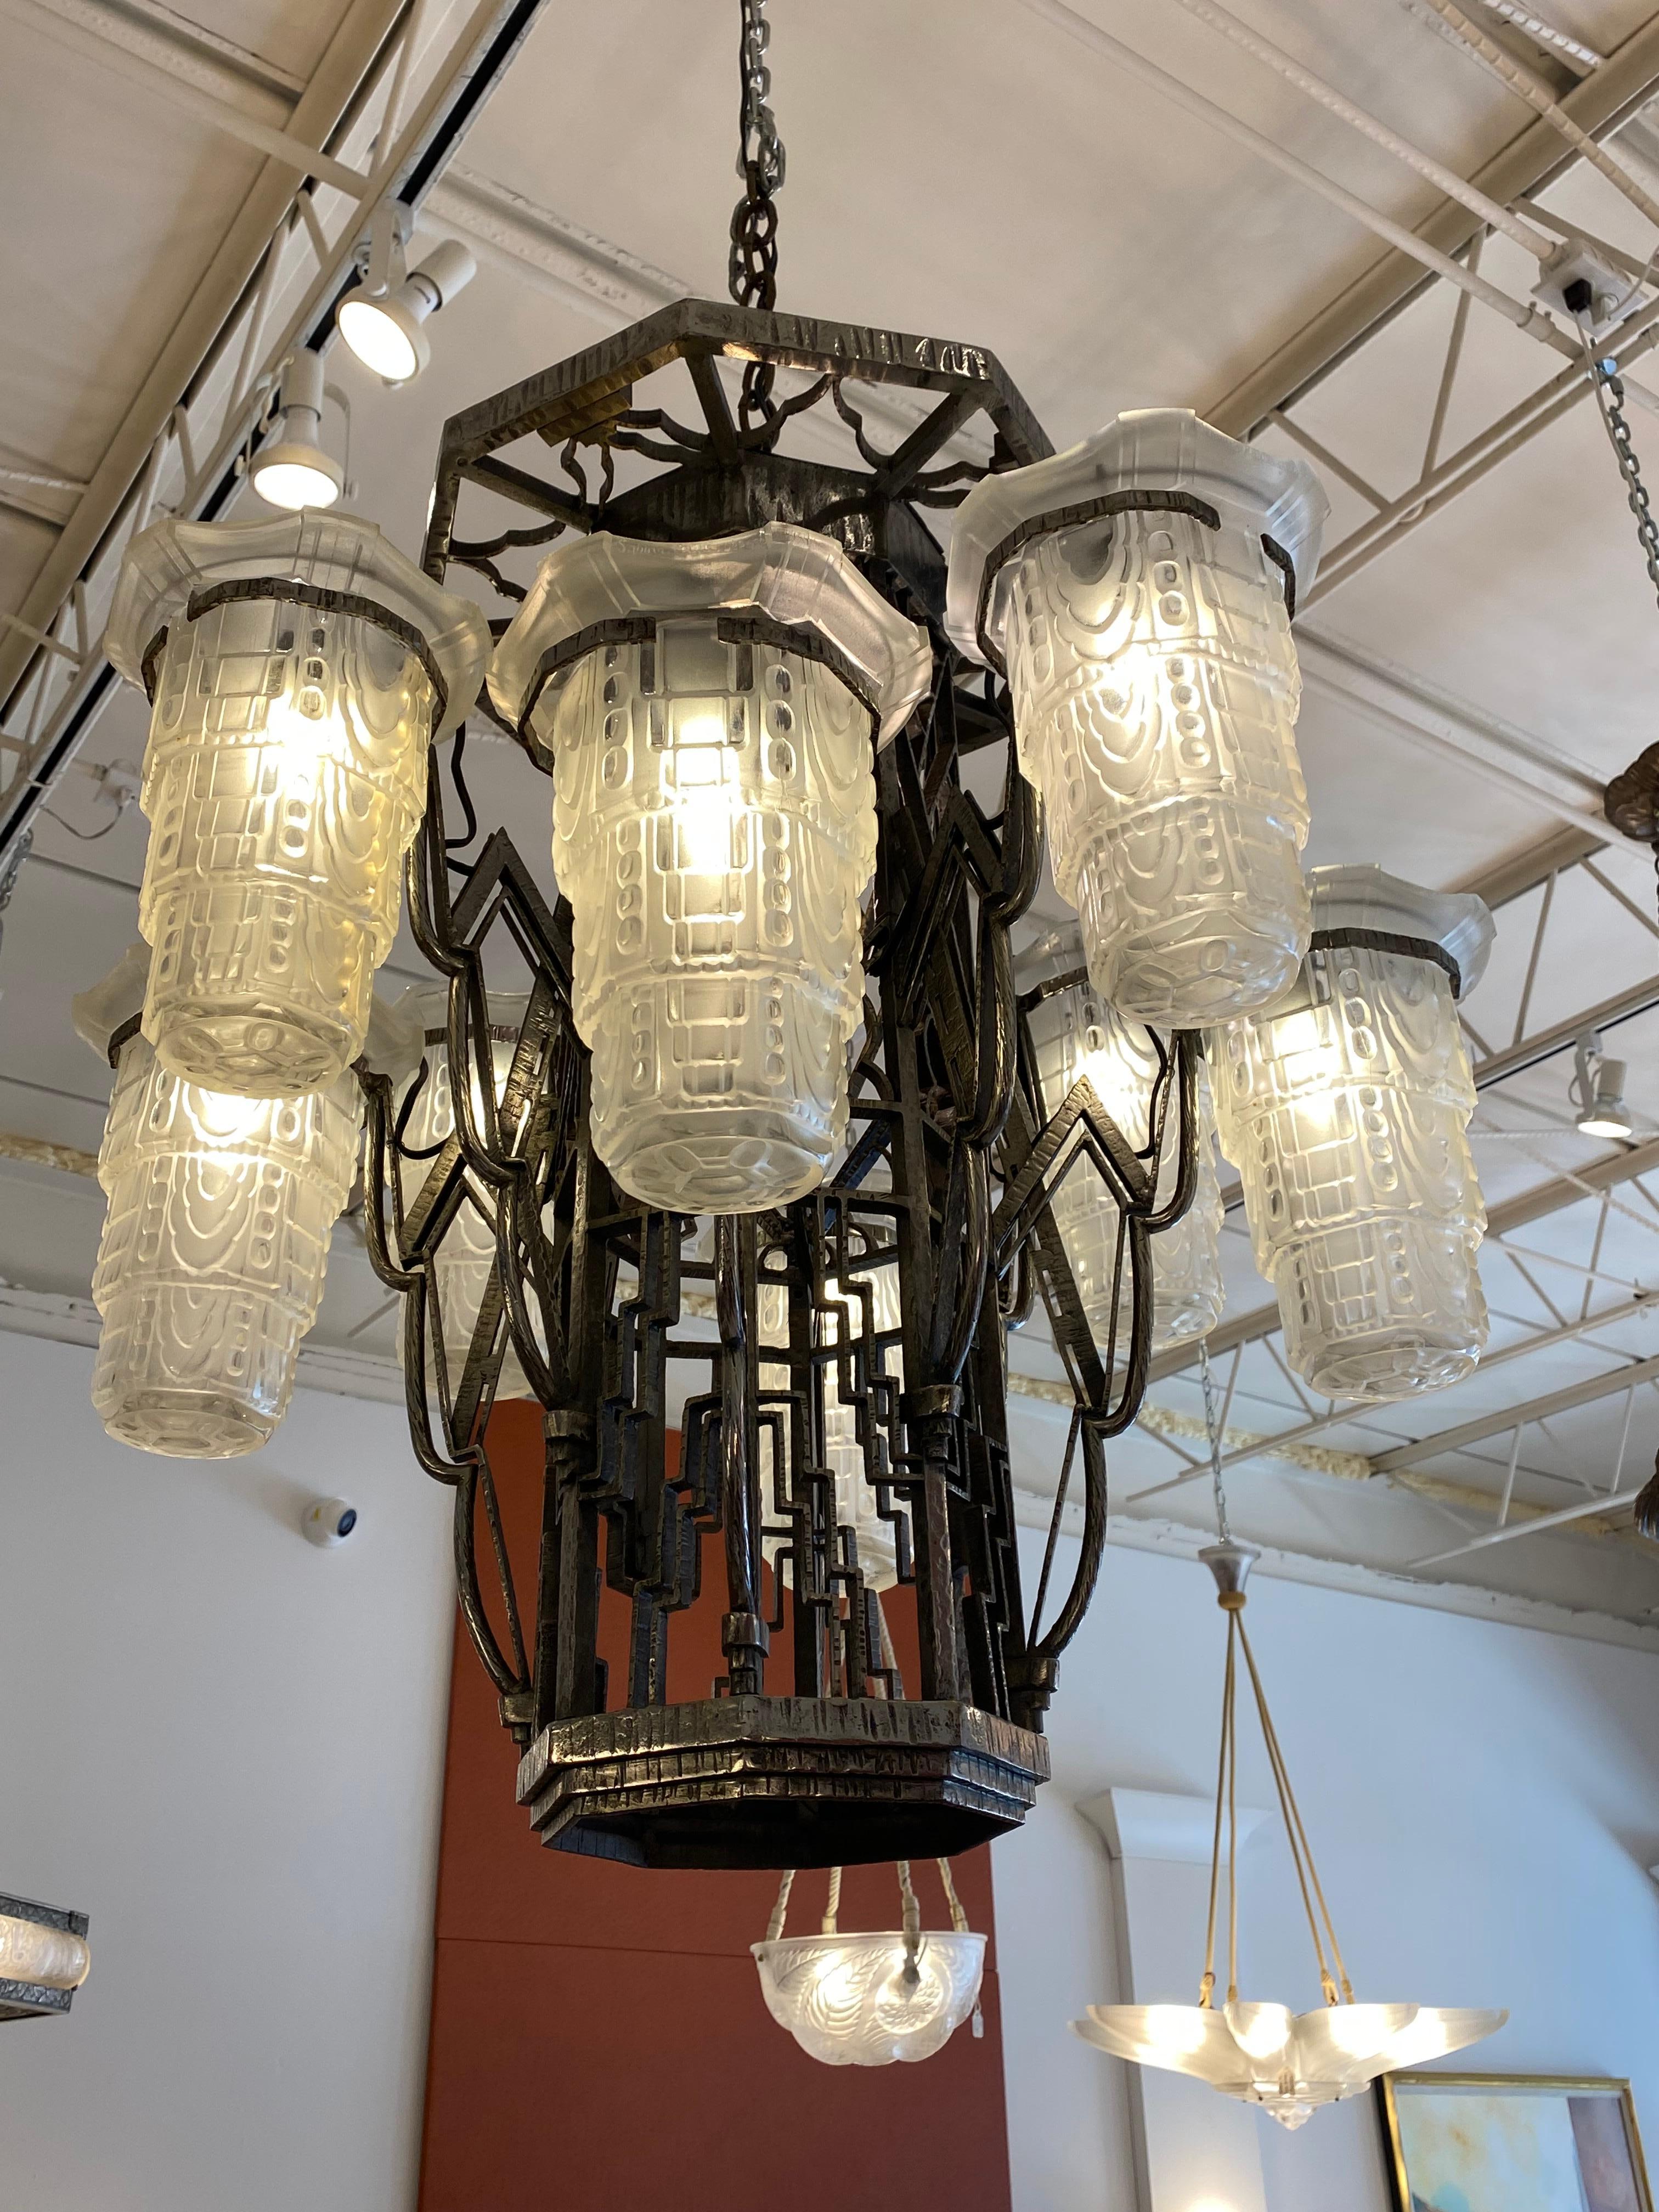 A French Art Deco wrought iron chandelier with frosted glass shades by Ernest-Marius Sabino.
Signature: Sabino on the glass shades

